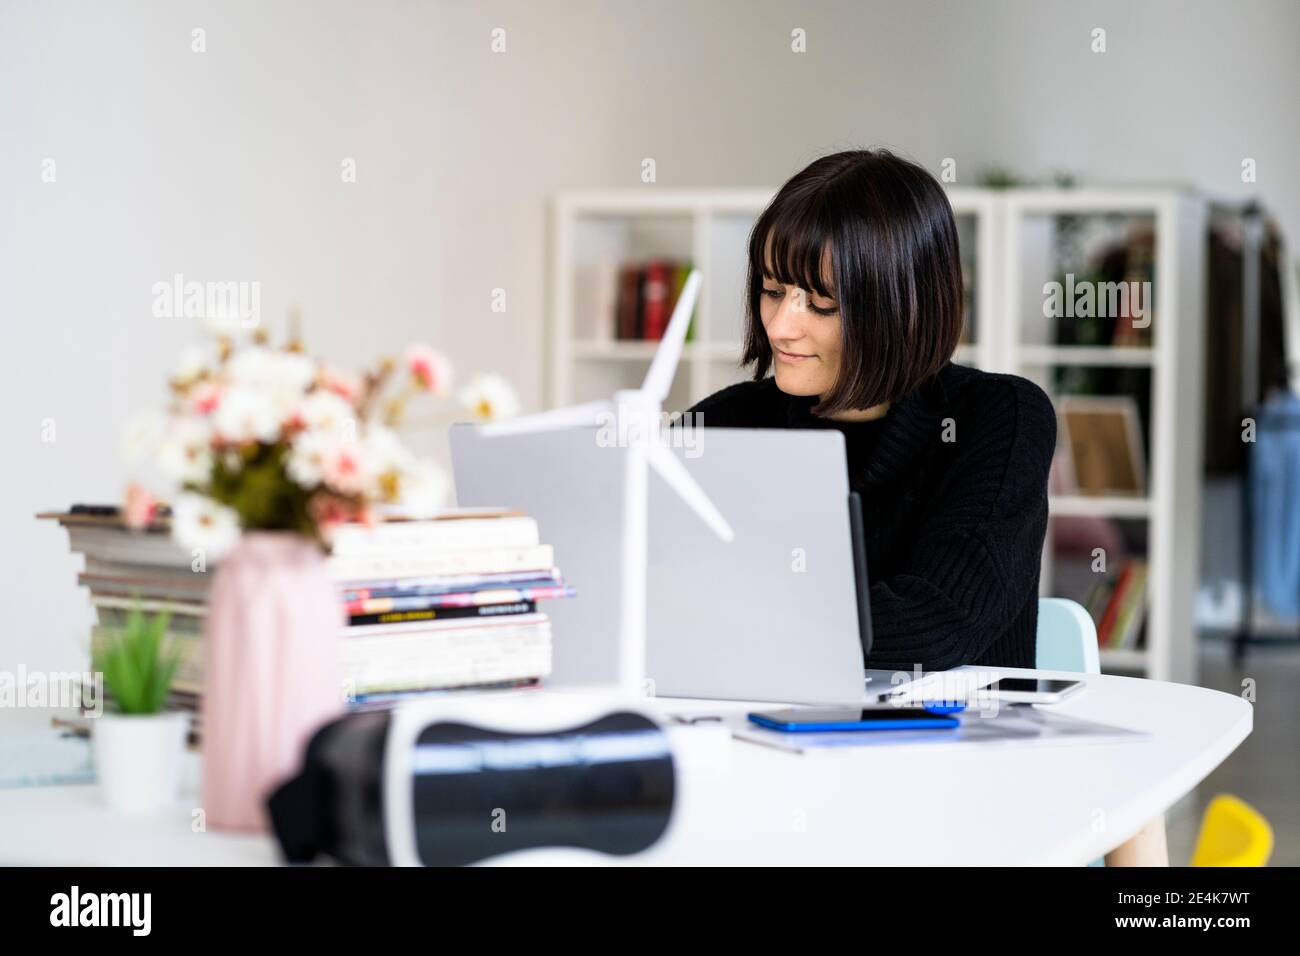 Young female student with concentration studying in study room Stock Photo